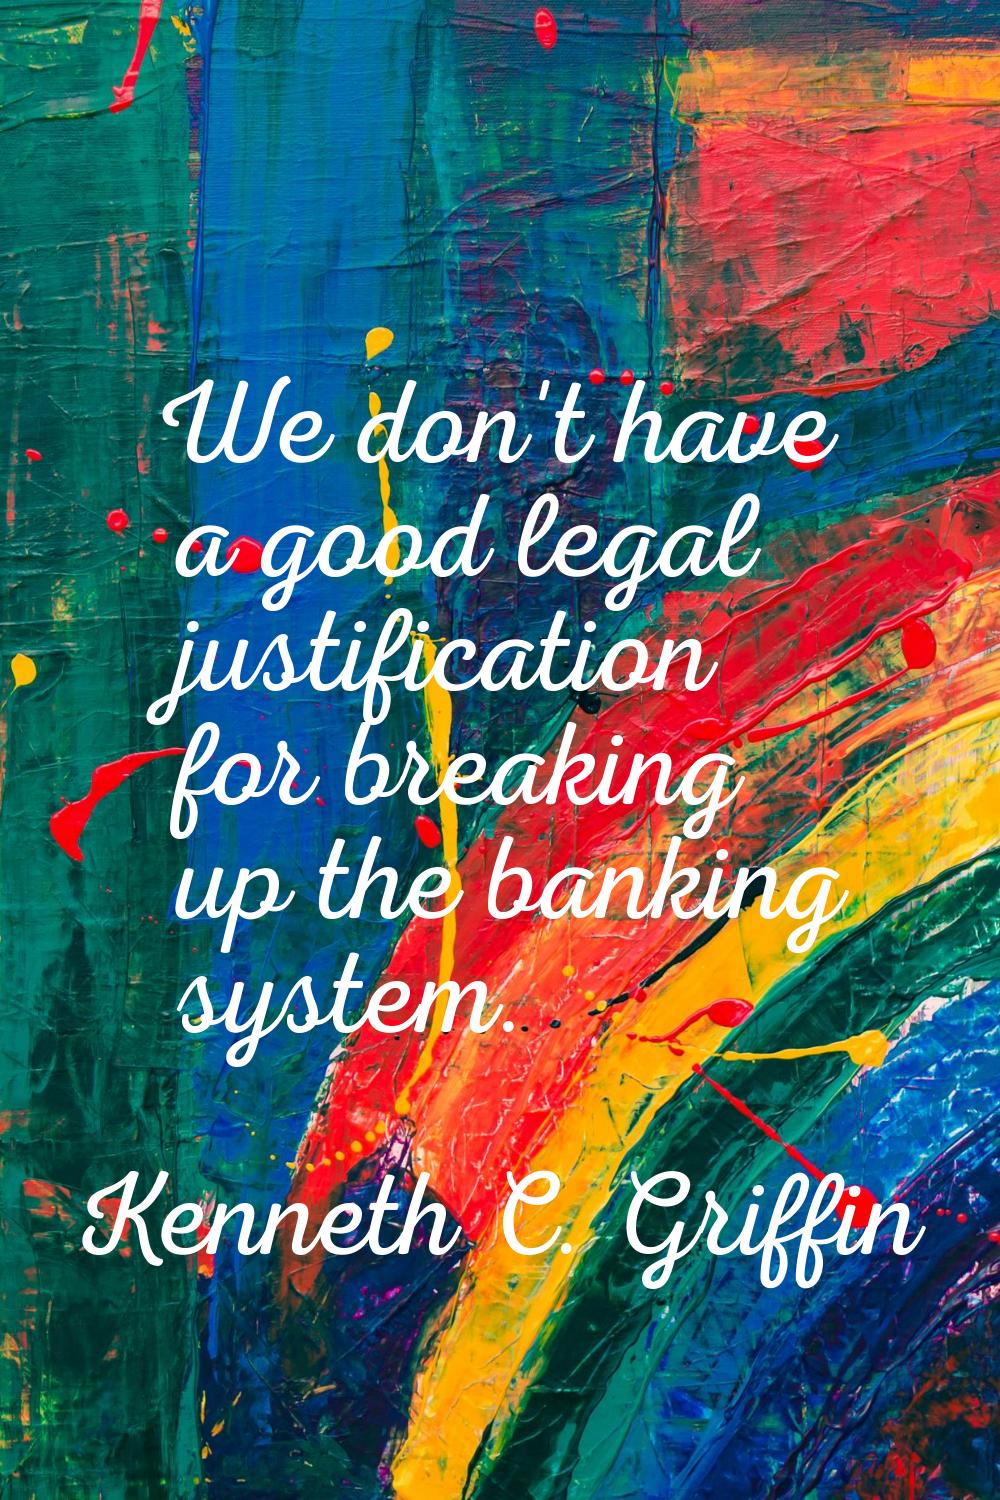 We don't have a good legal justification for breaking up the banking system.